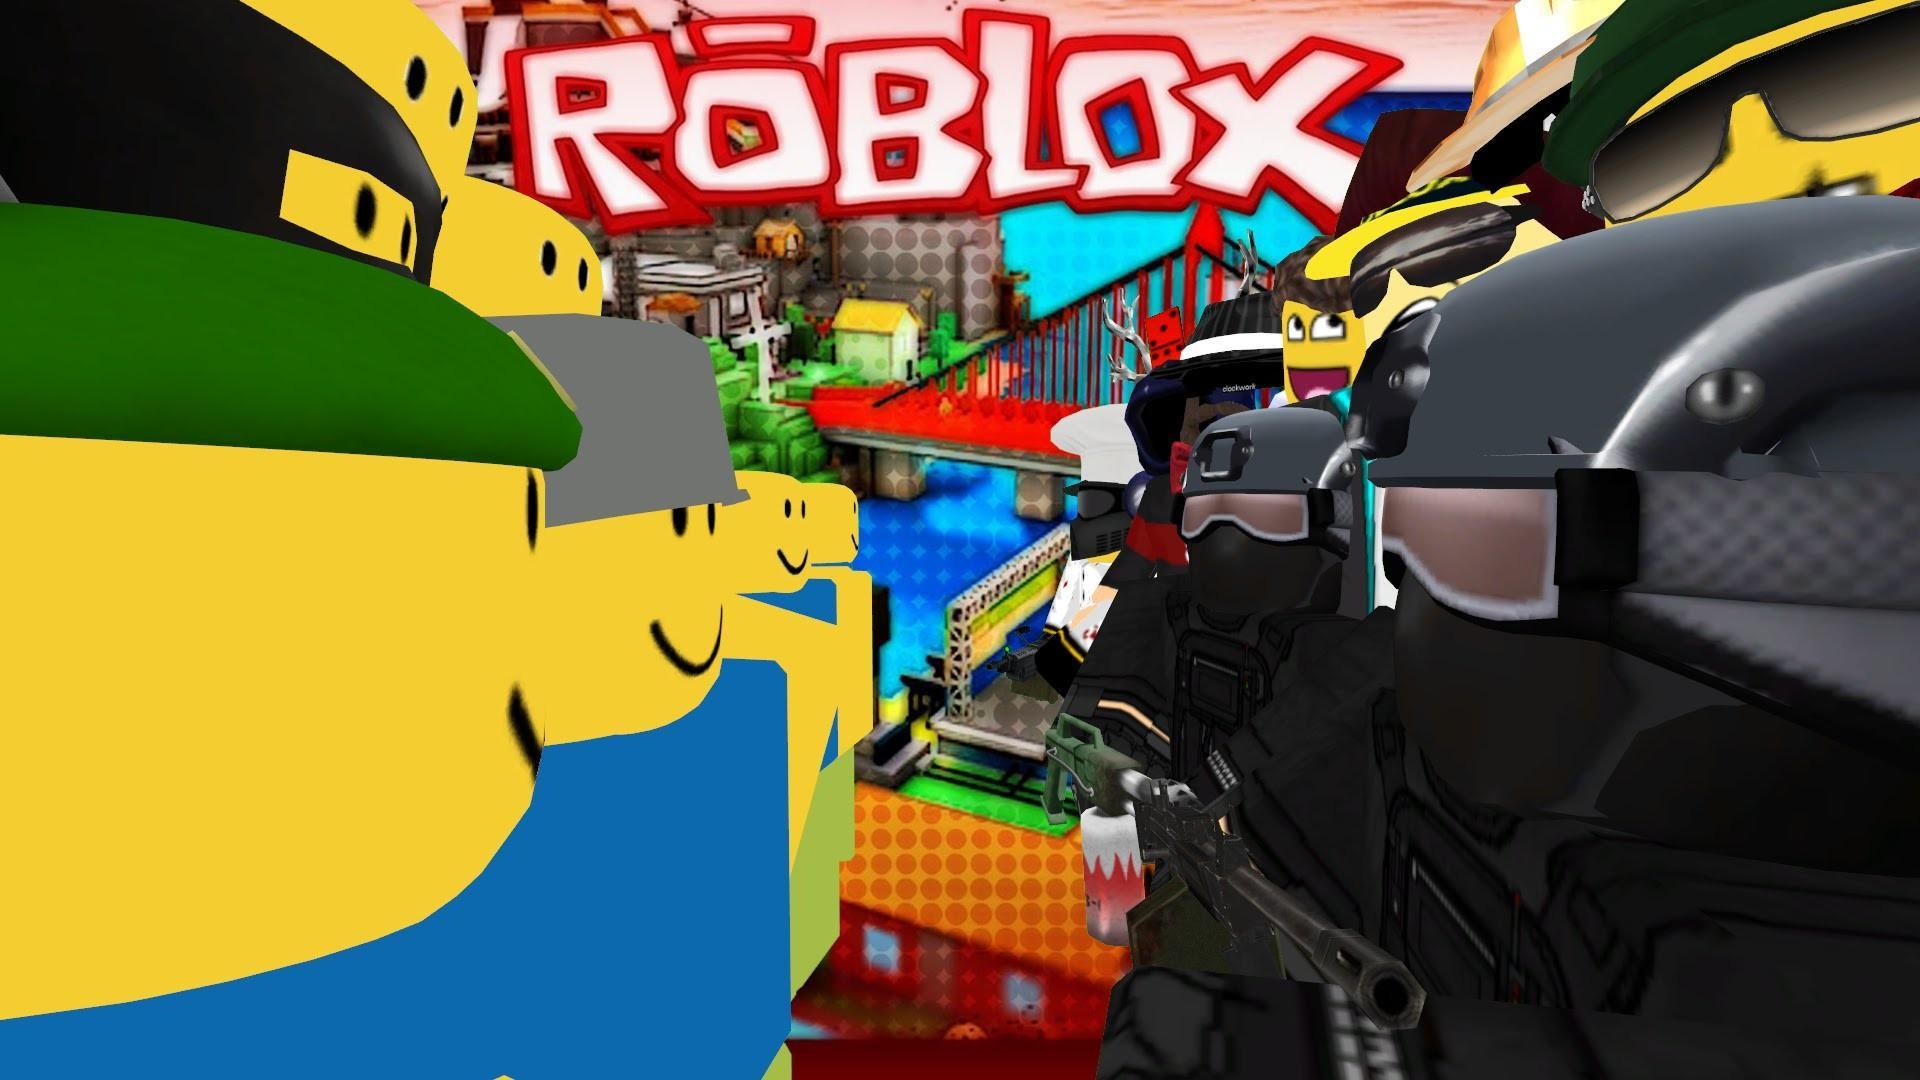 Roblox Wallpapers 2018 Hd For Android Apk Download